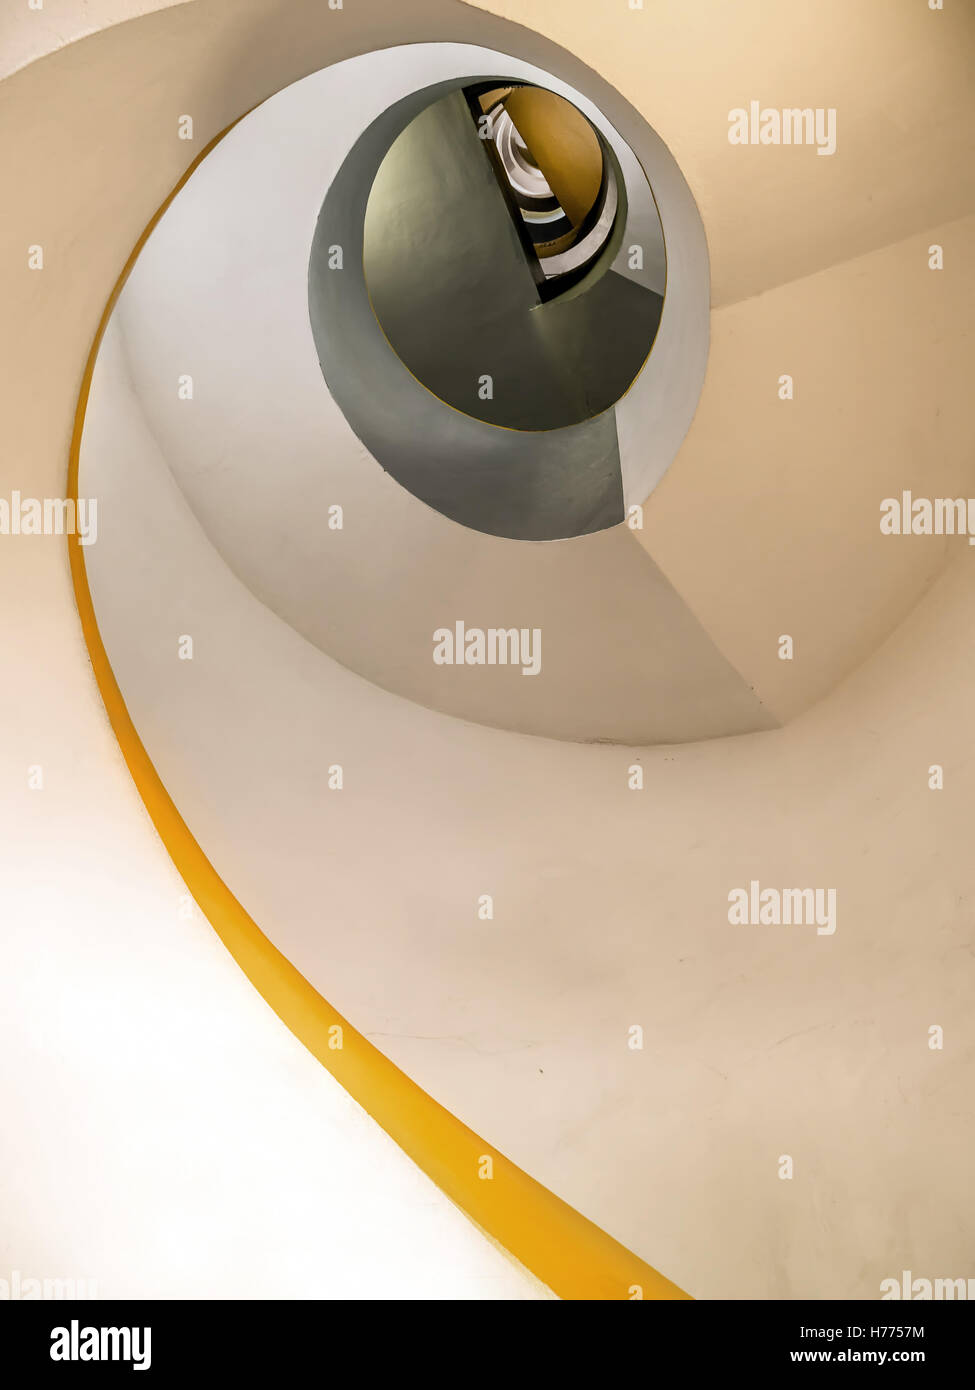 A spiral staircase looking up Stock Photo